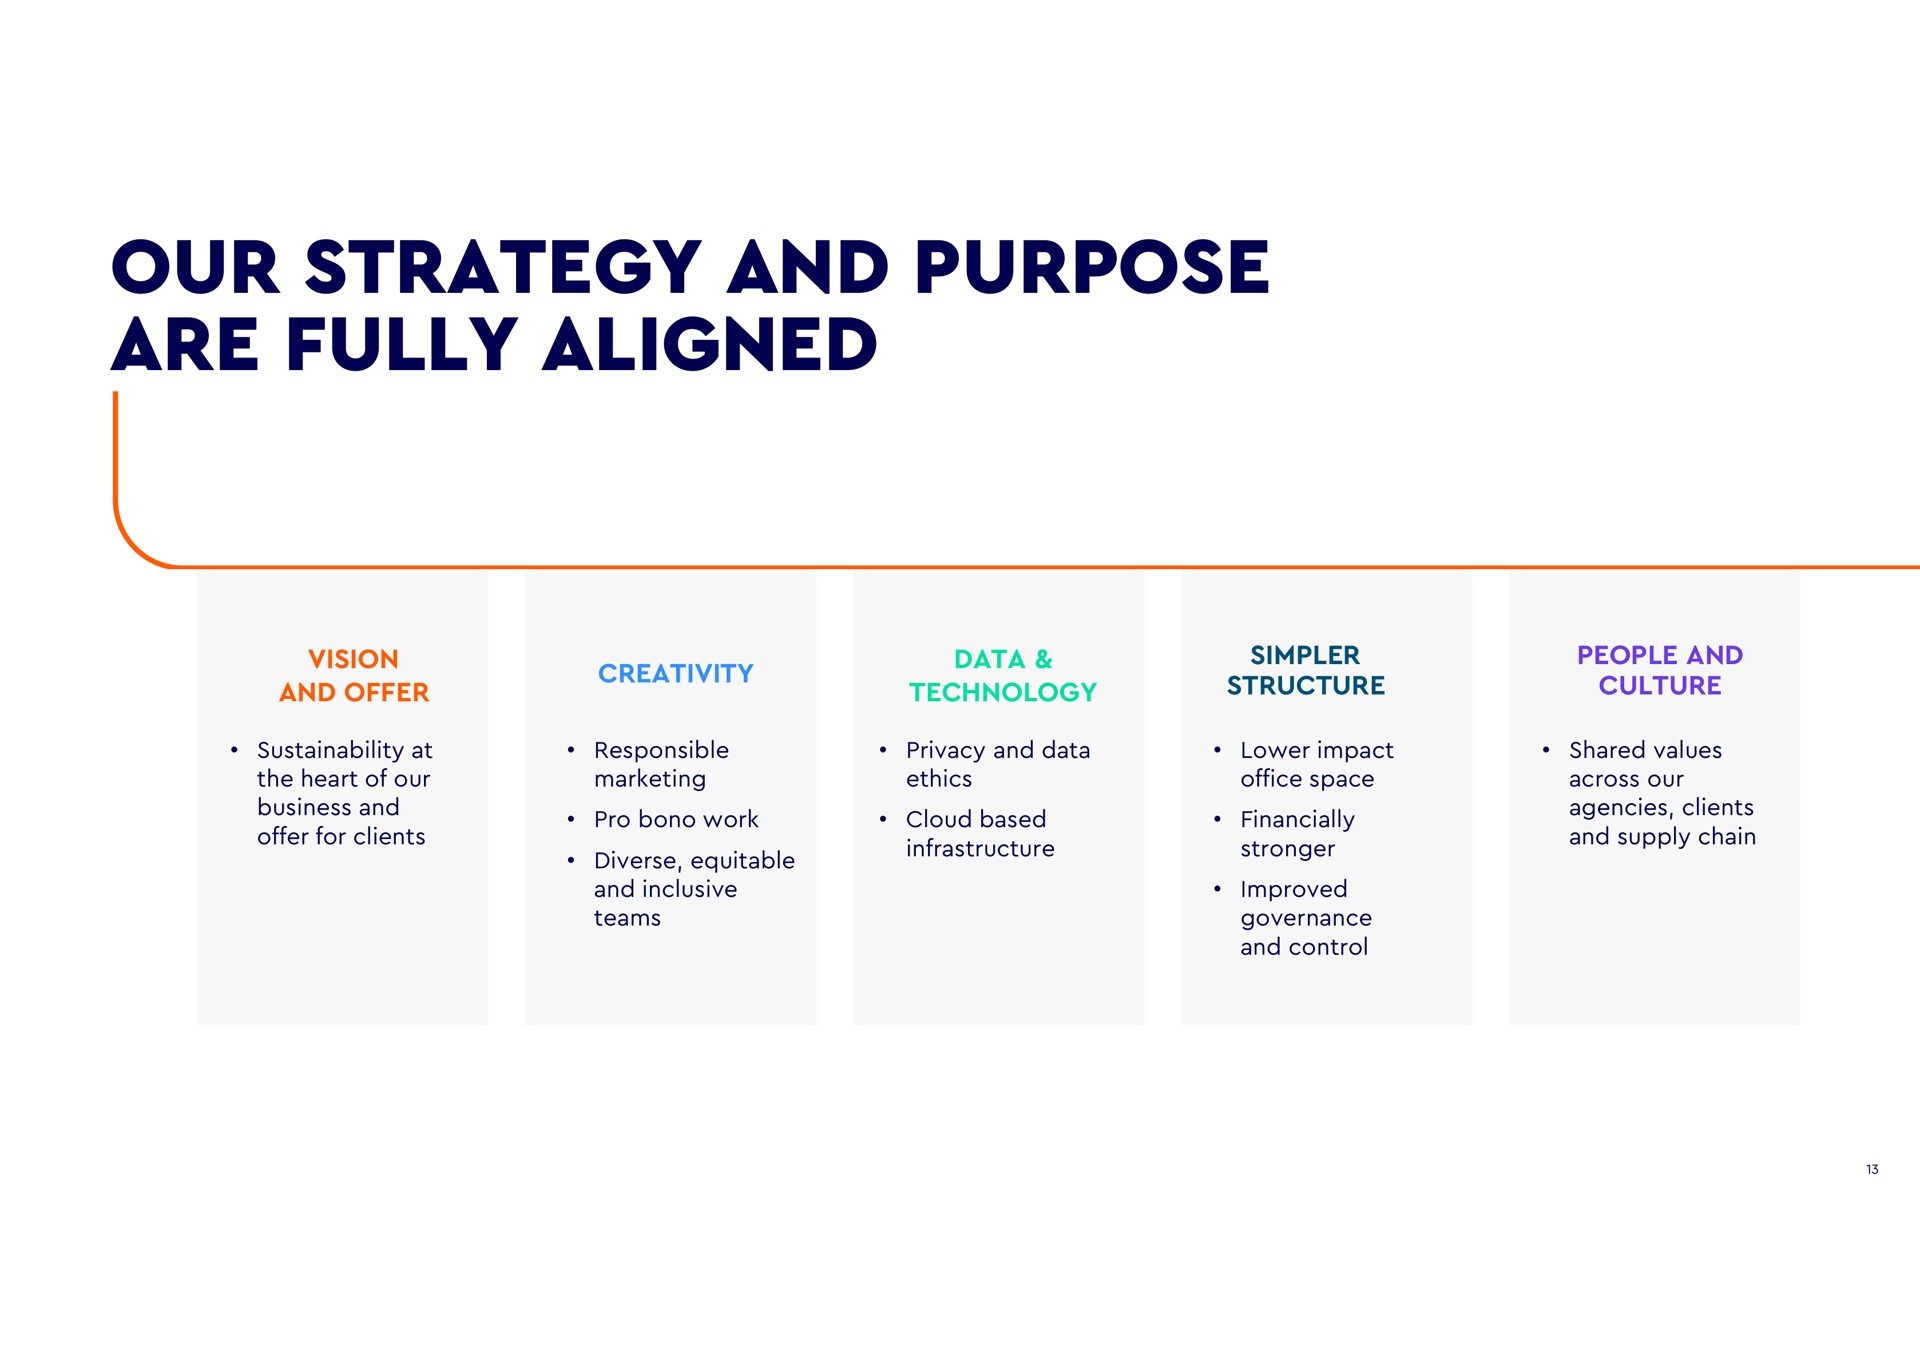 our strategy and purpose are fully aligned vision offer creativity simpler structure people culture at the heart of business genes responsible marketing privacy data ethics lower impact office space pro work equitable cloud based infrastructure inclusive teams financially improved governance control shared values across clients supply chain | WPP